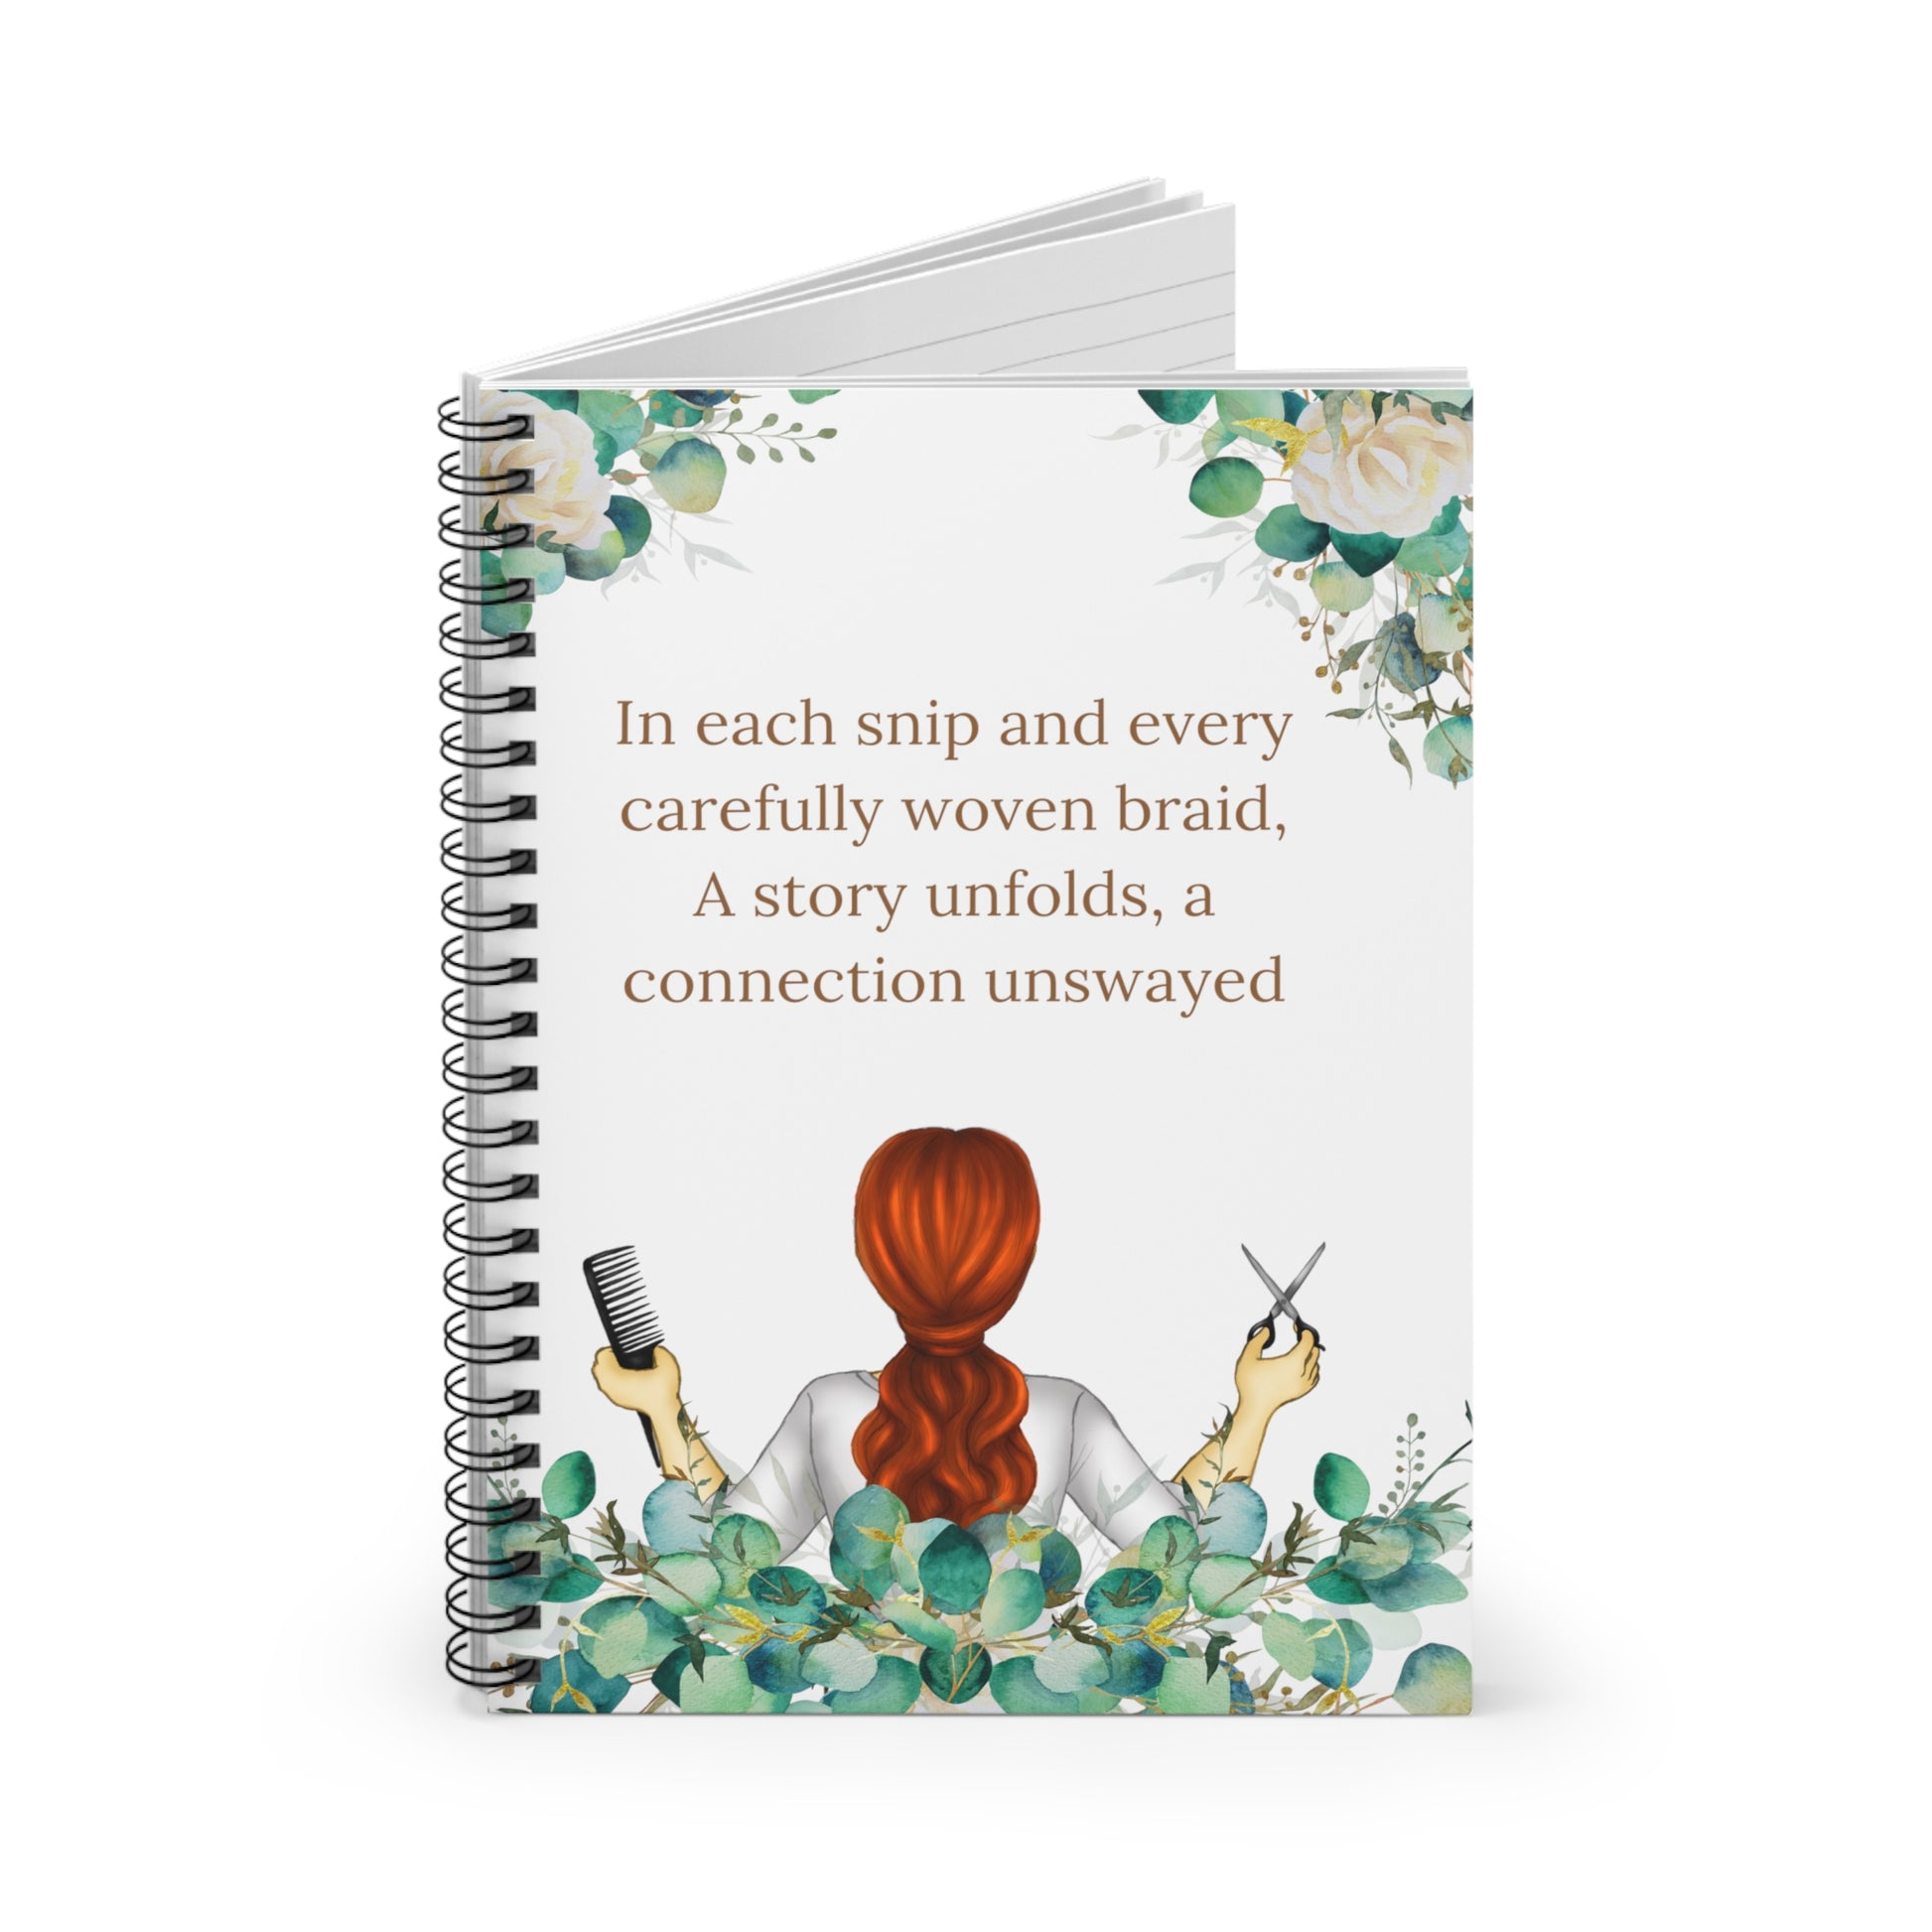 Snip in Time: Spiral Notebook - Log Books - Journals - Diaries - and More Custom Printed by TheGlassyLass